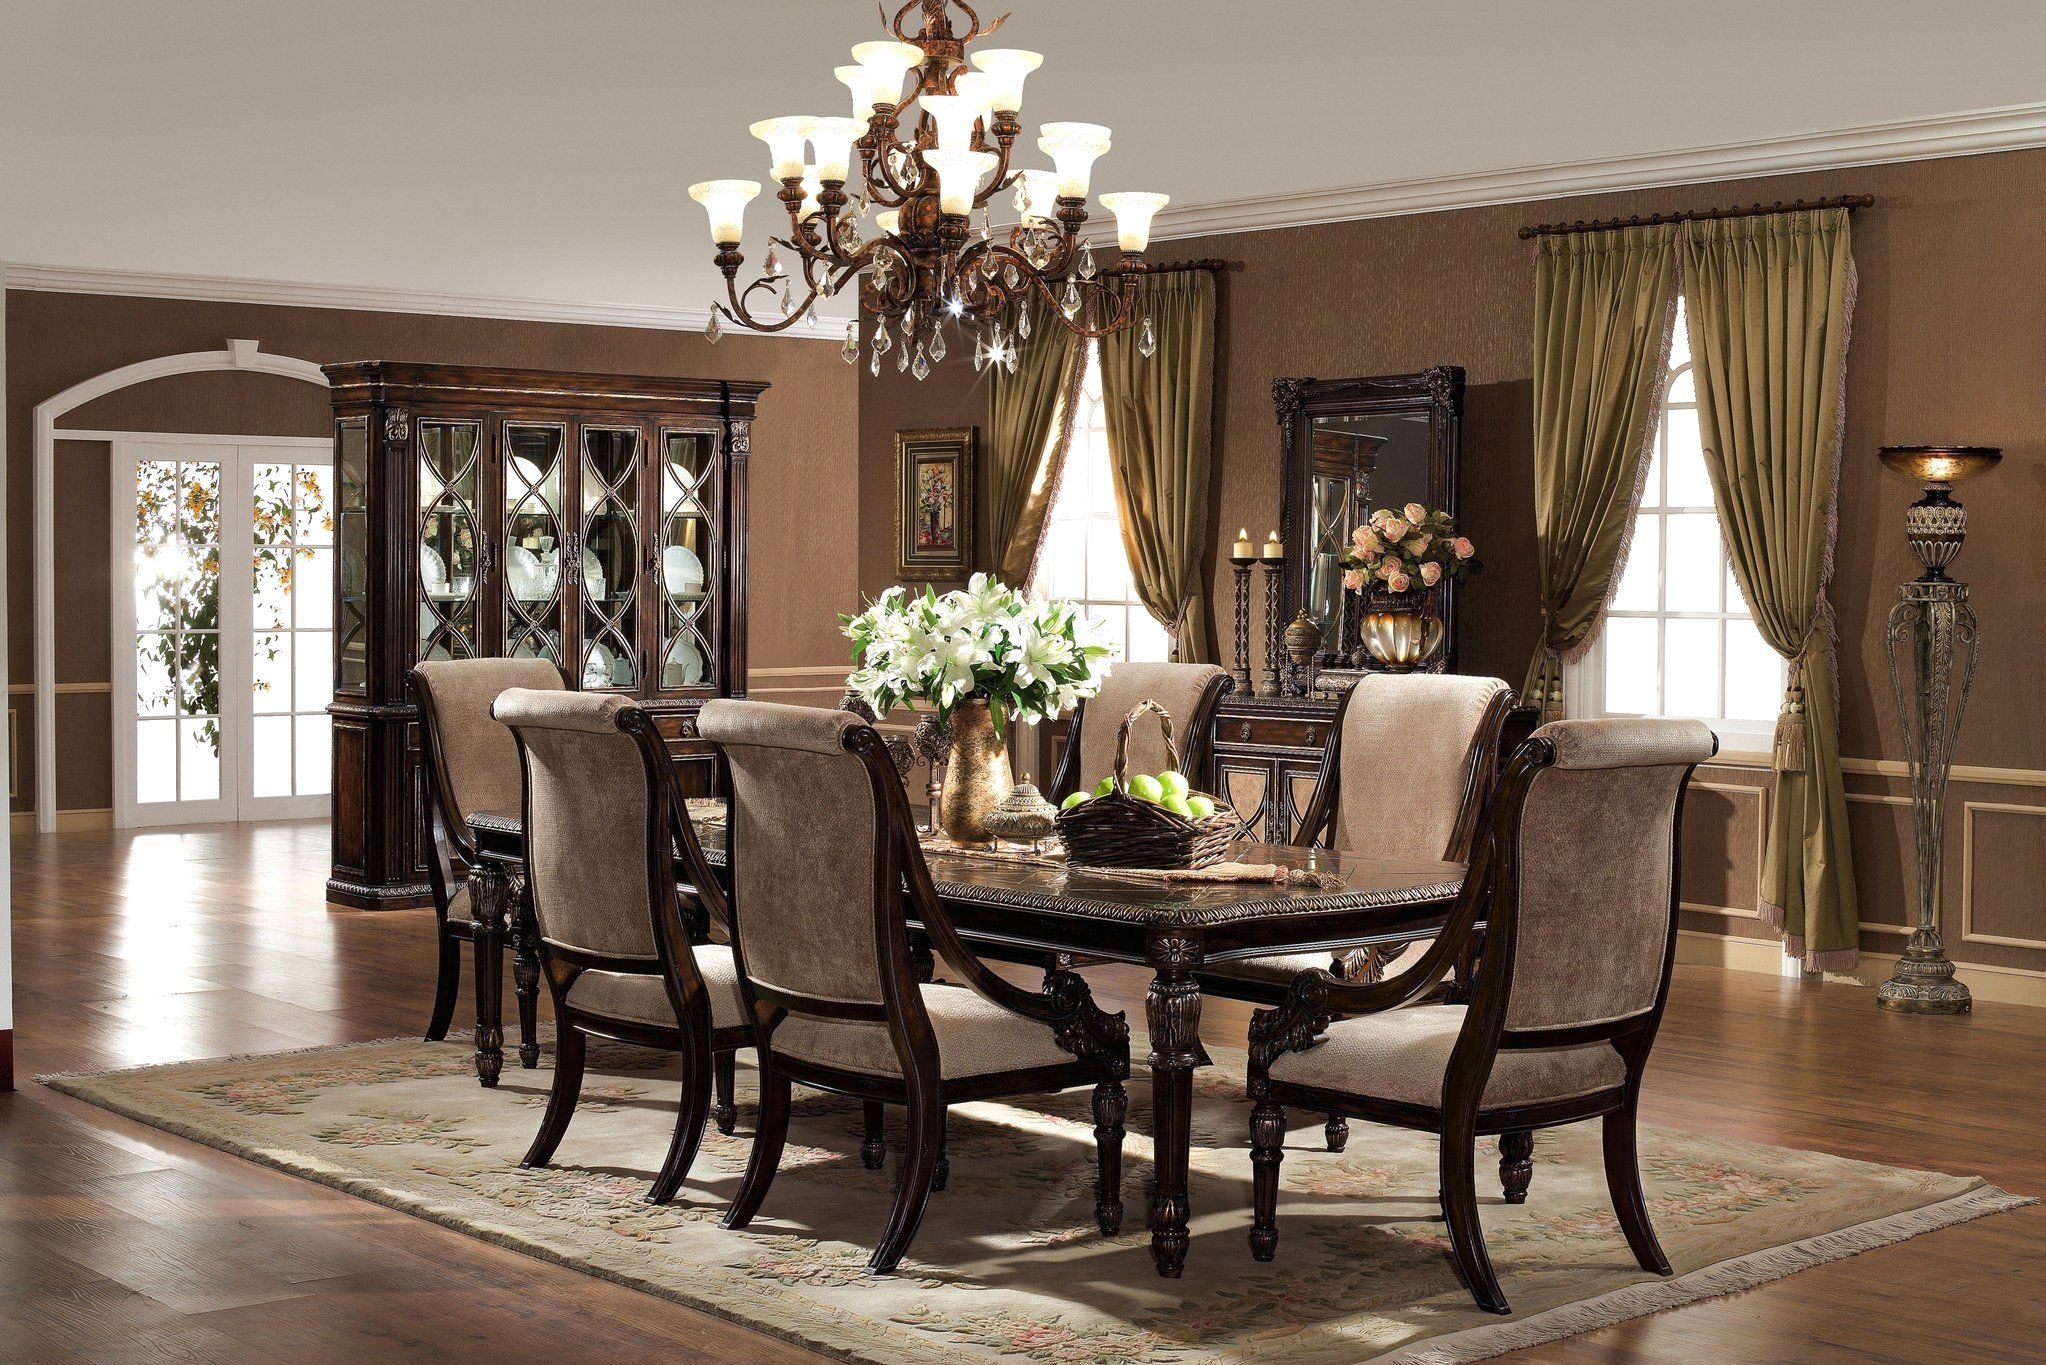 Formal Dining Room Sets You Ll Love In, Formal Dining Room Table Set Up